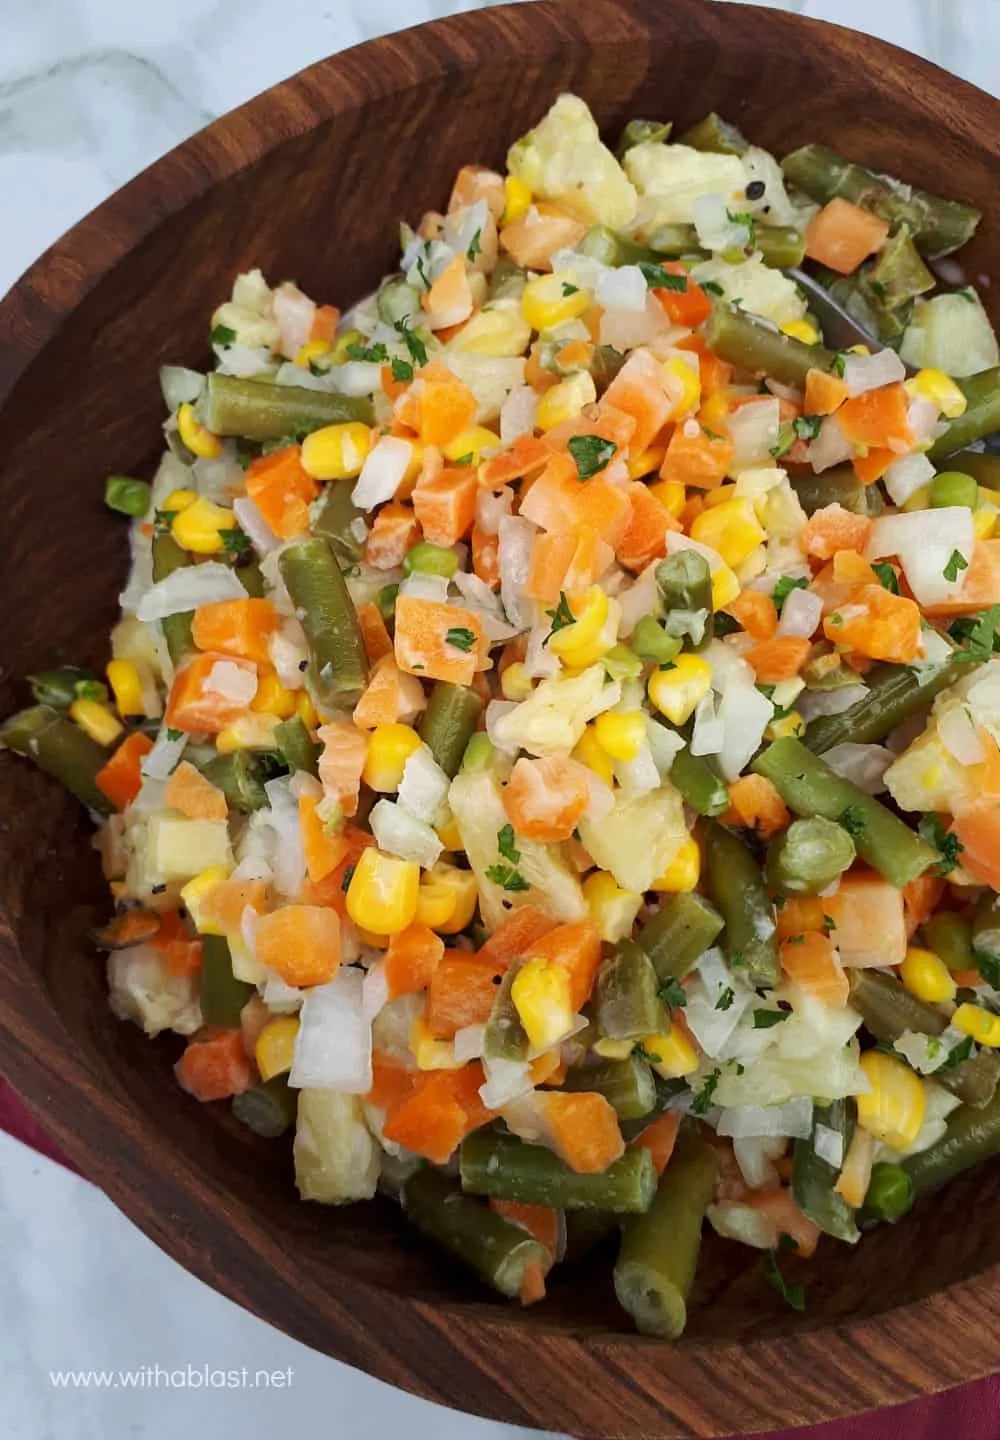 Tropical Vegetable Salad is loaded with vegetables and the added Pineapple makes the salad a hit, especially with kids - savory-sweet crunchy delicious!